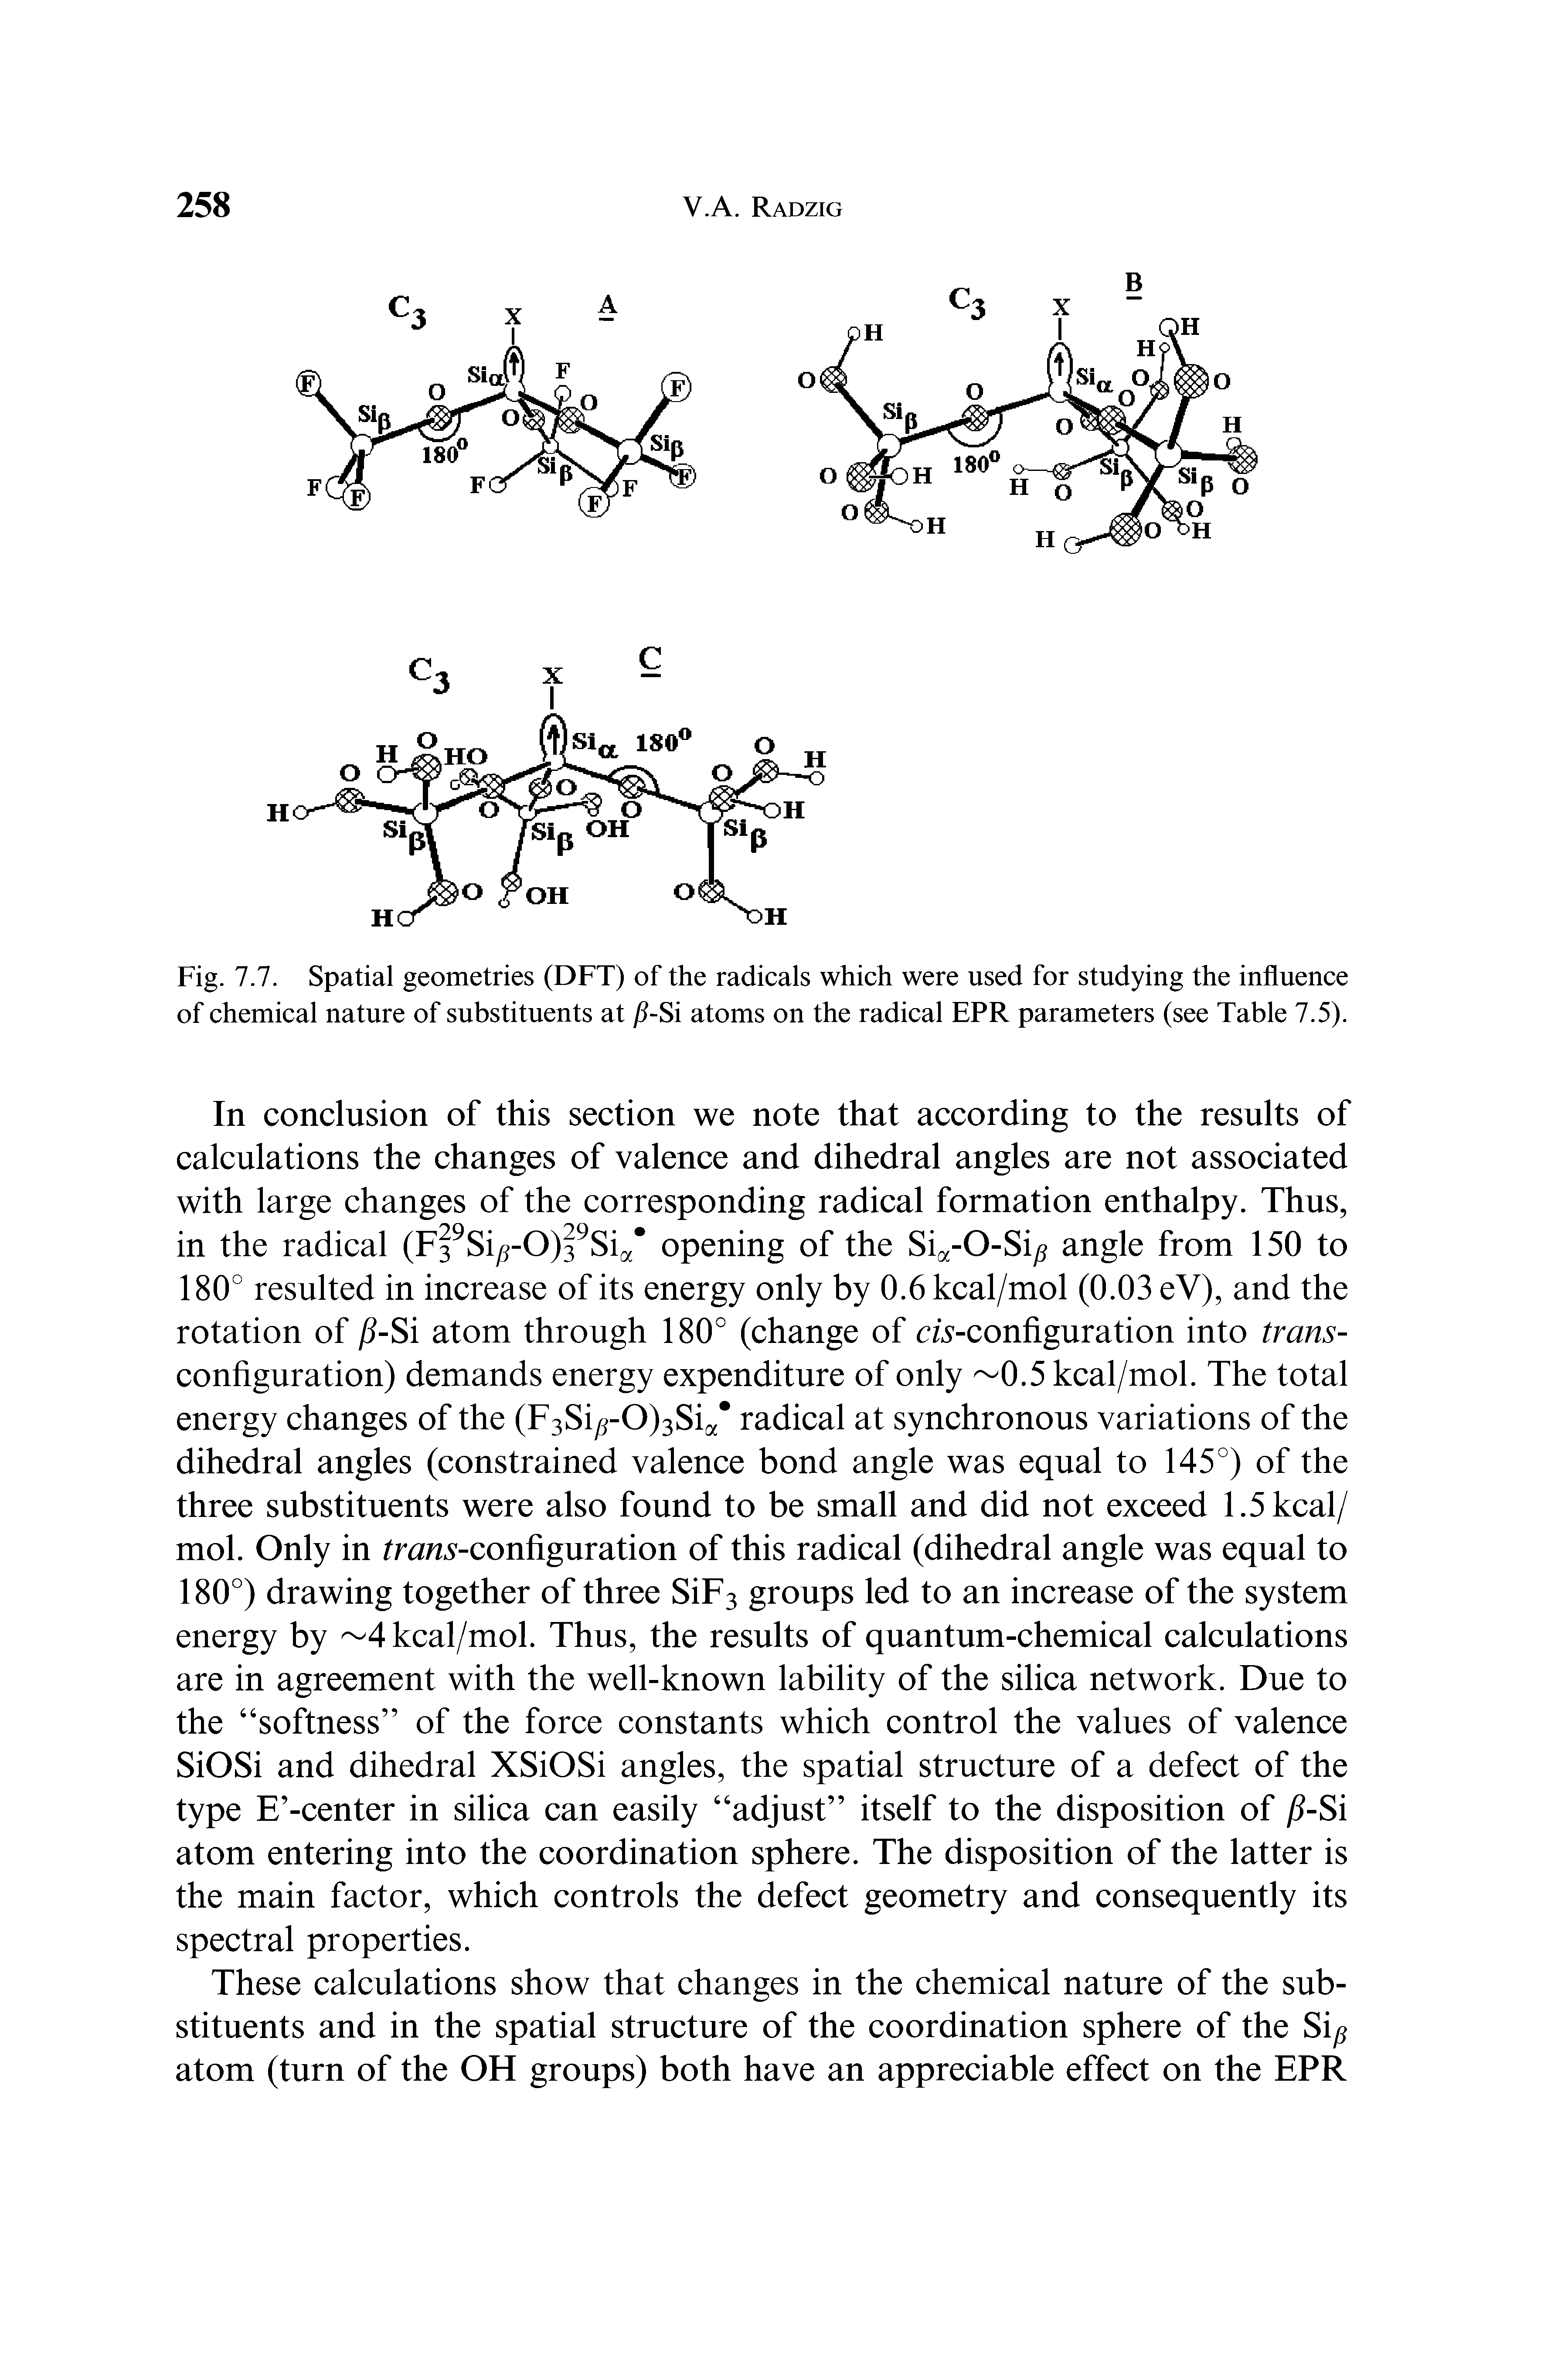 Fig. 7.7. Spatial geometries (DFT) of the radicals which were used for studying the influence of chemical nature of substituents at /7-Si atoms on the radical EPR parameters (see Table 7.5).